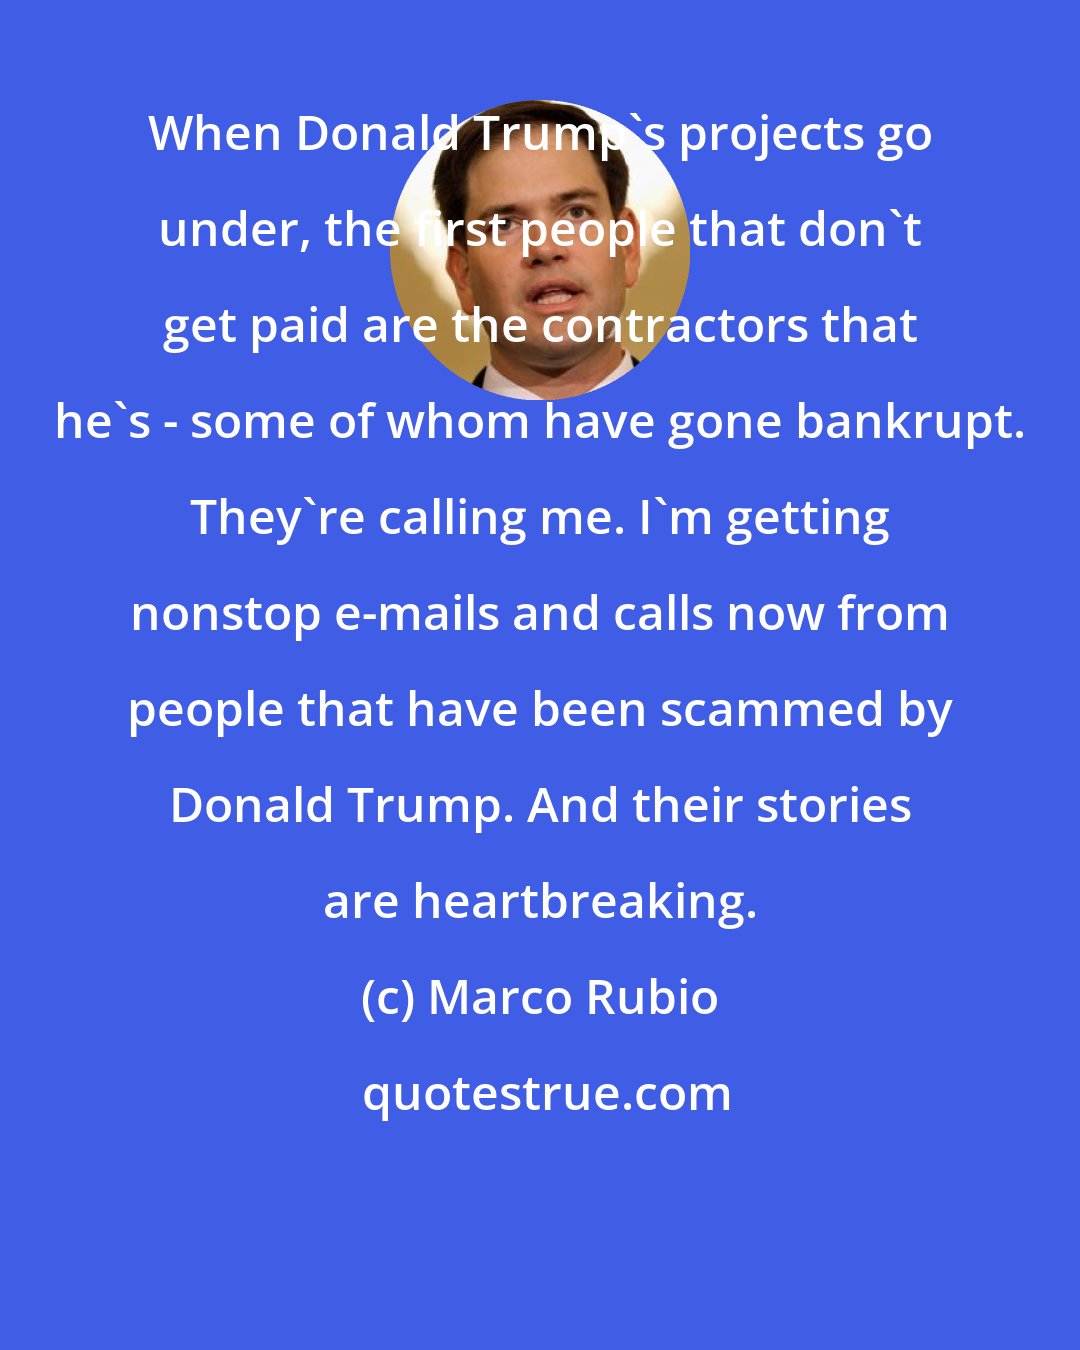 Marco Rubio: When Donald Trump's projects go under, the first people that don't get paid are the contractors that he's - some of whom have gone bankrupt. They're calling me. I'm getting nonstop e-mails and calls now from people that have been scammed by Donald Trump. And their stories are heartbreaking.